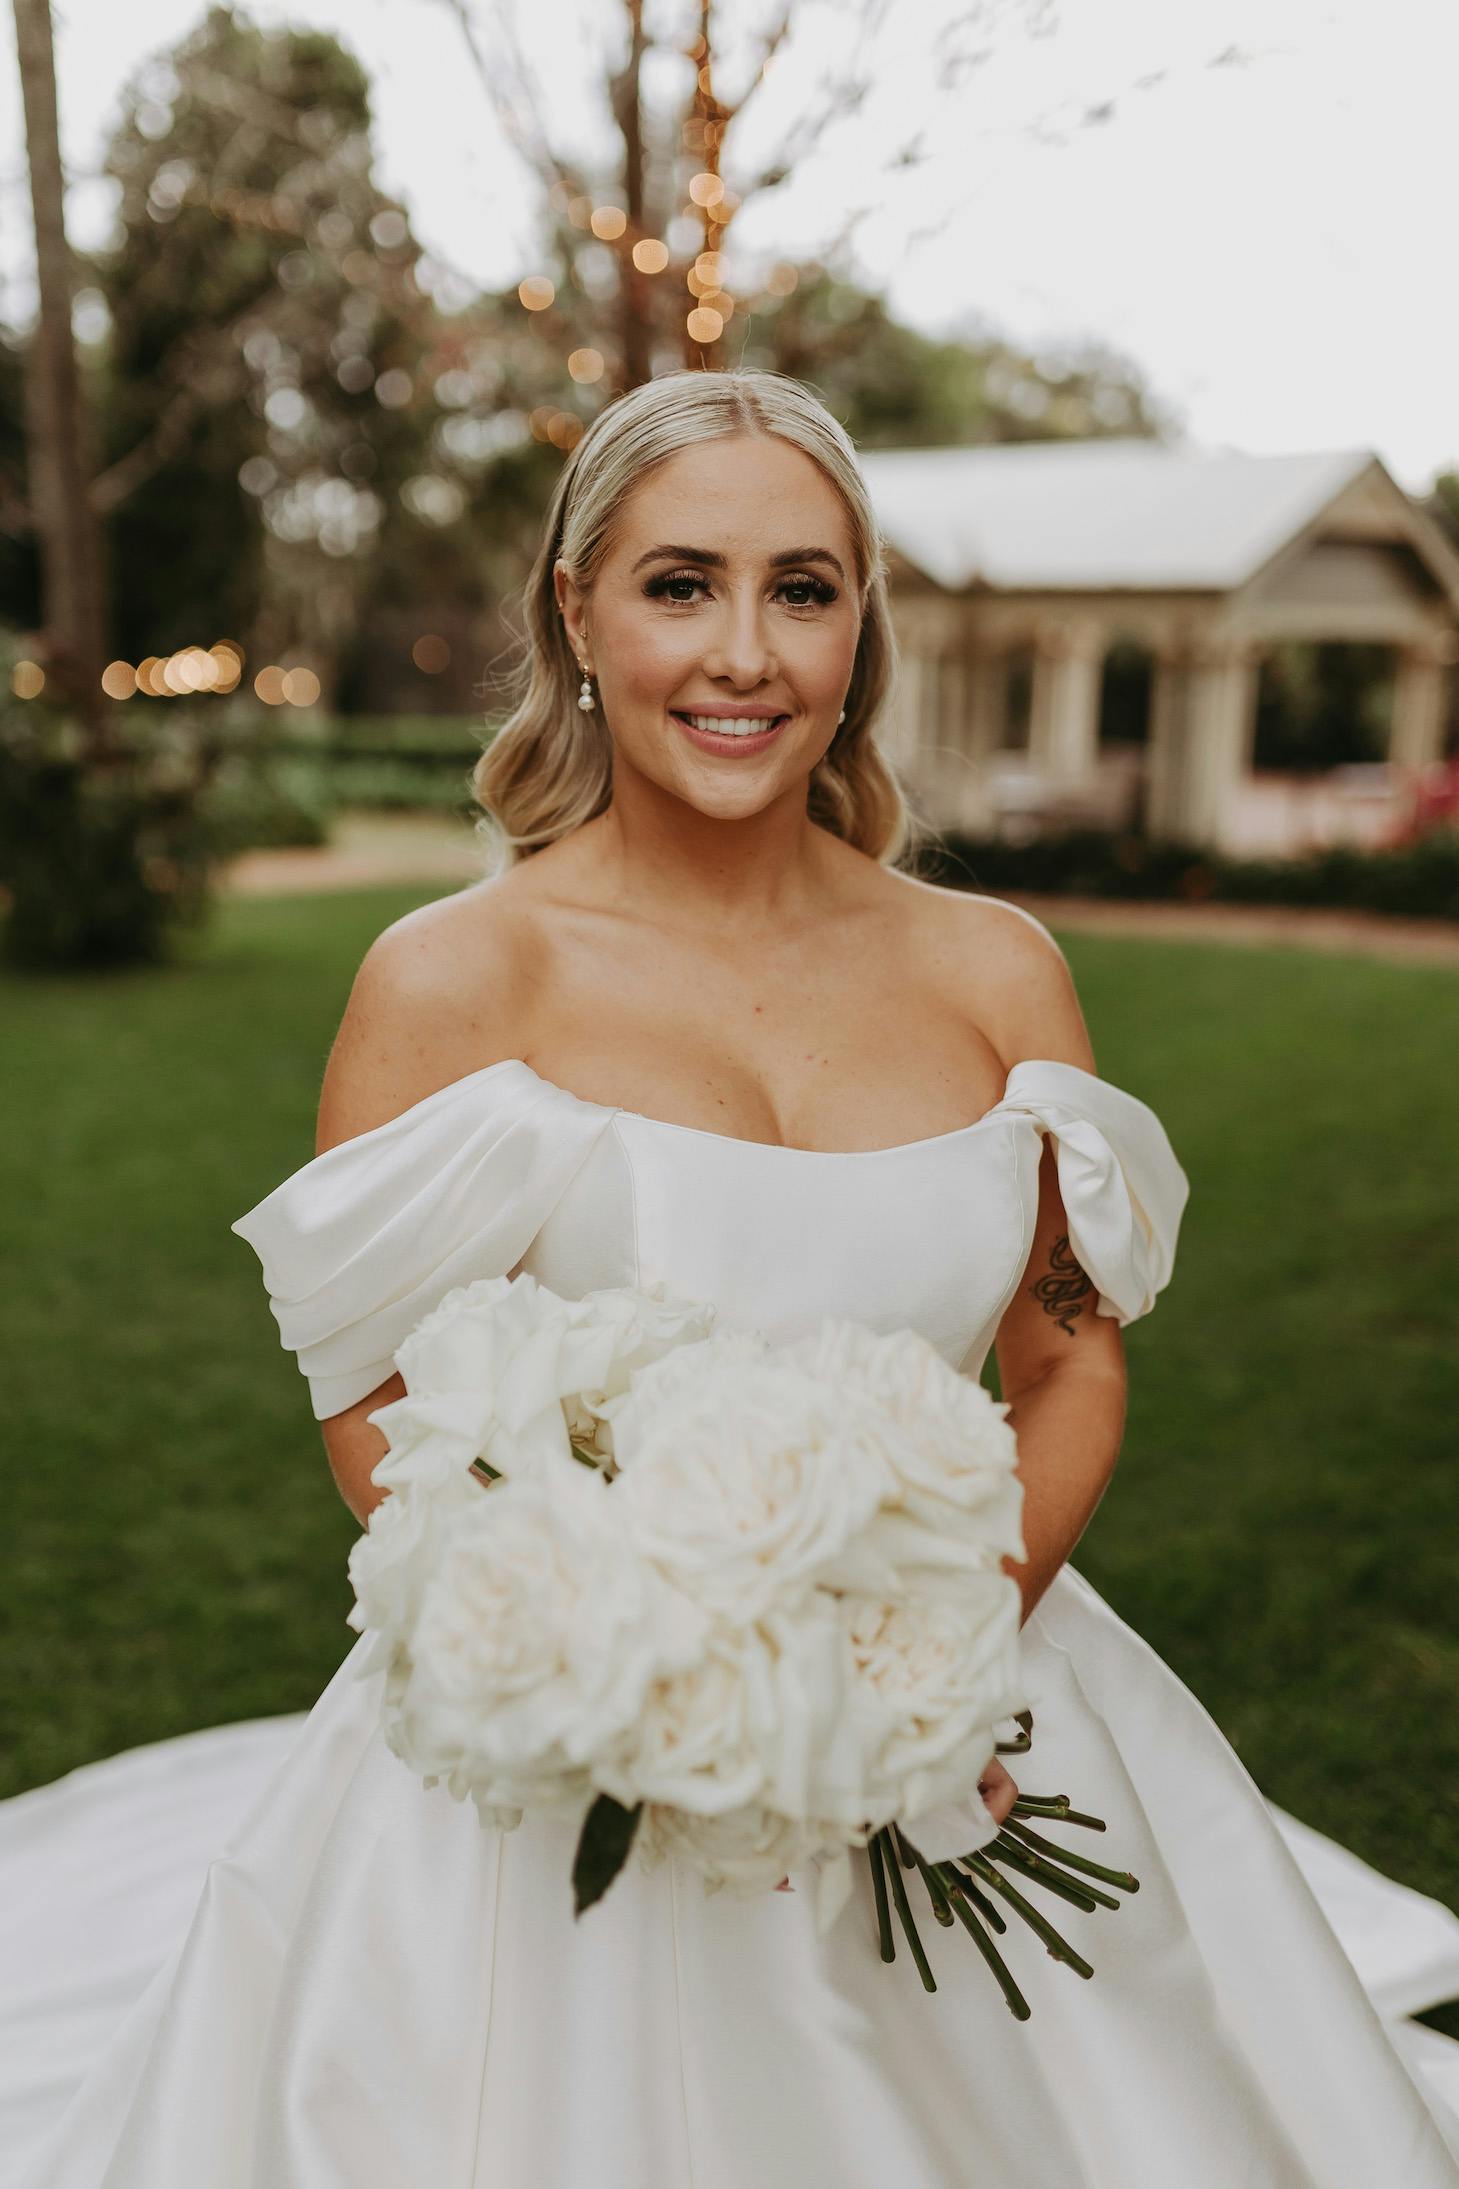 A bride with long blonde hair stands outside on a grassy lawn. She is wearing a white off-the-shoulder wedding dress and holding a bouquet of white roses. In the background, there are trees and a small building. The bride is smiling at the camera.